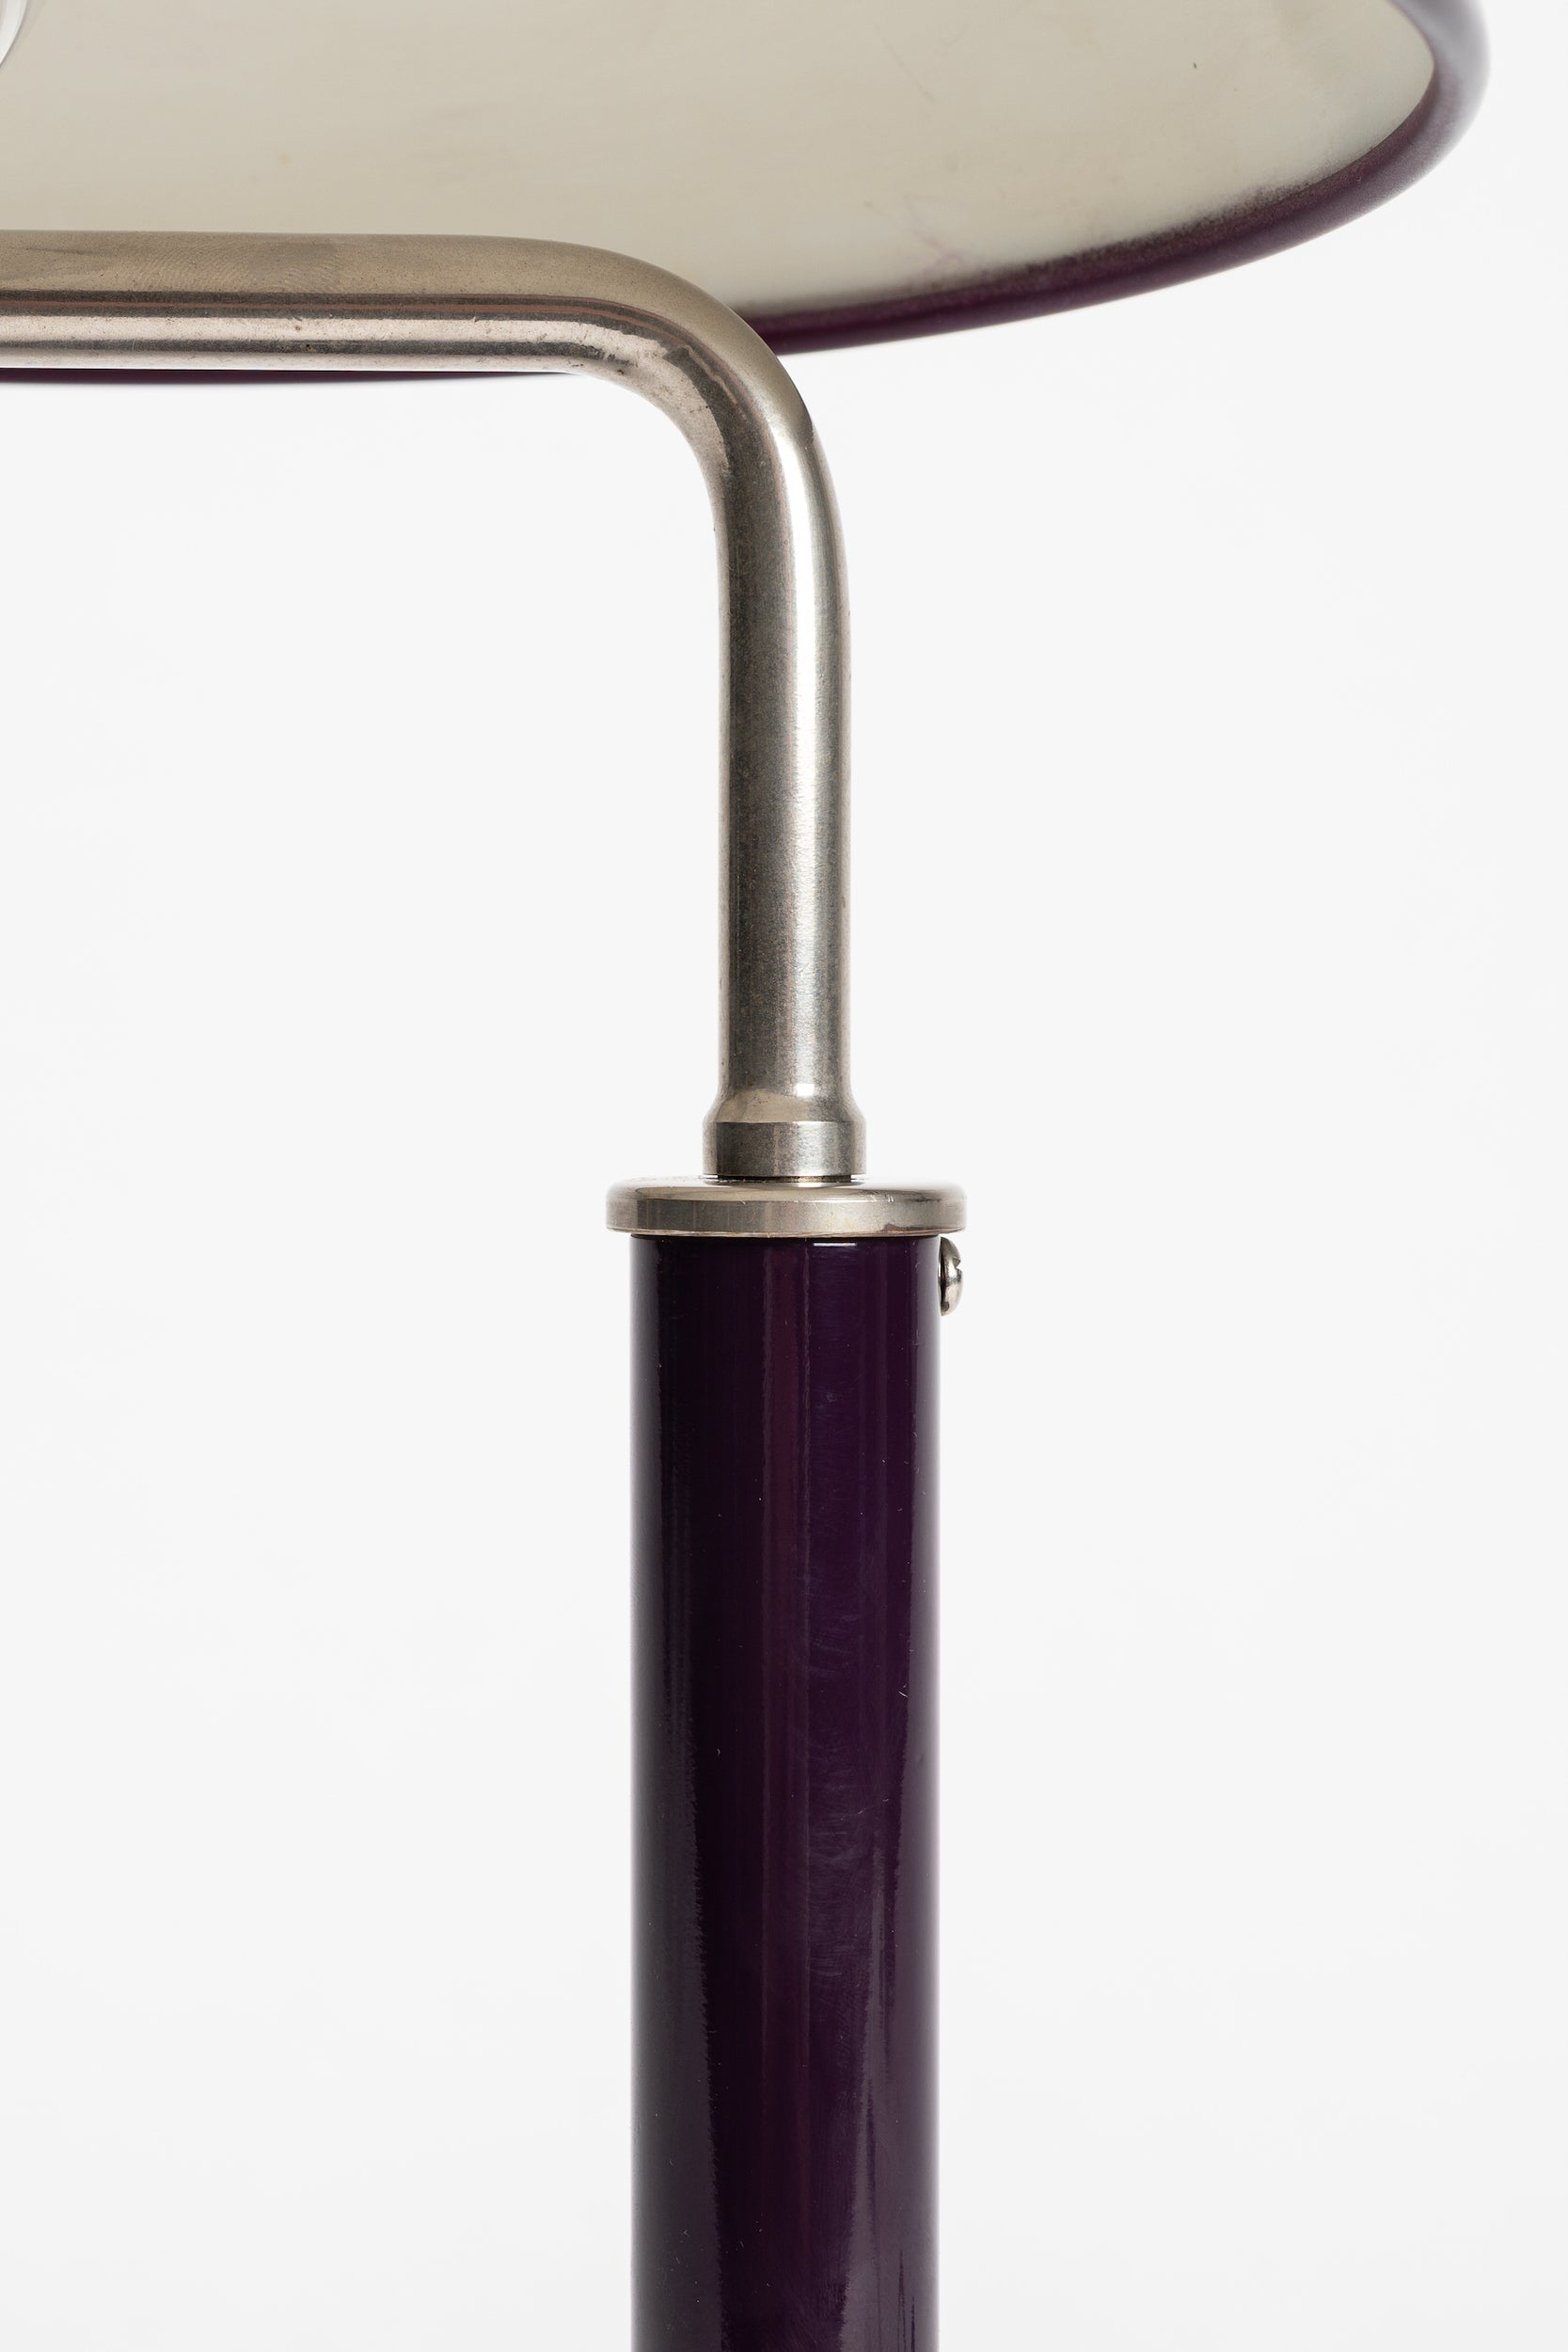 Alfred Müller, Table Lamp "Quick", Belmag, Switzerland, 40s